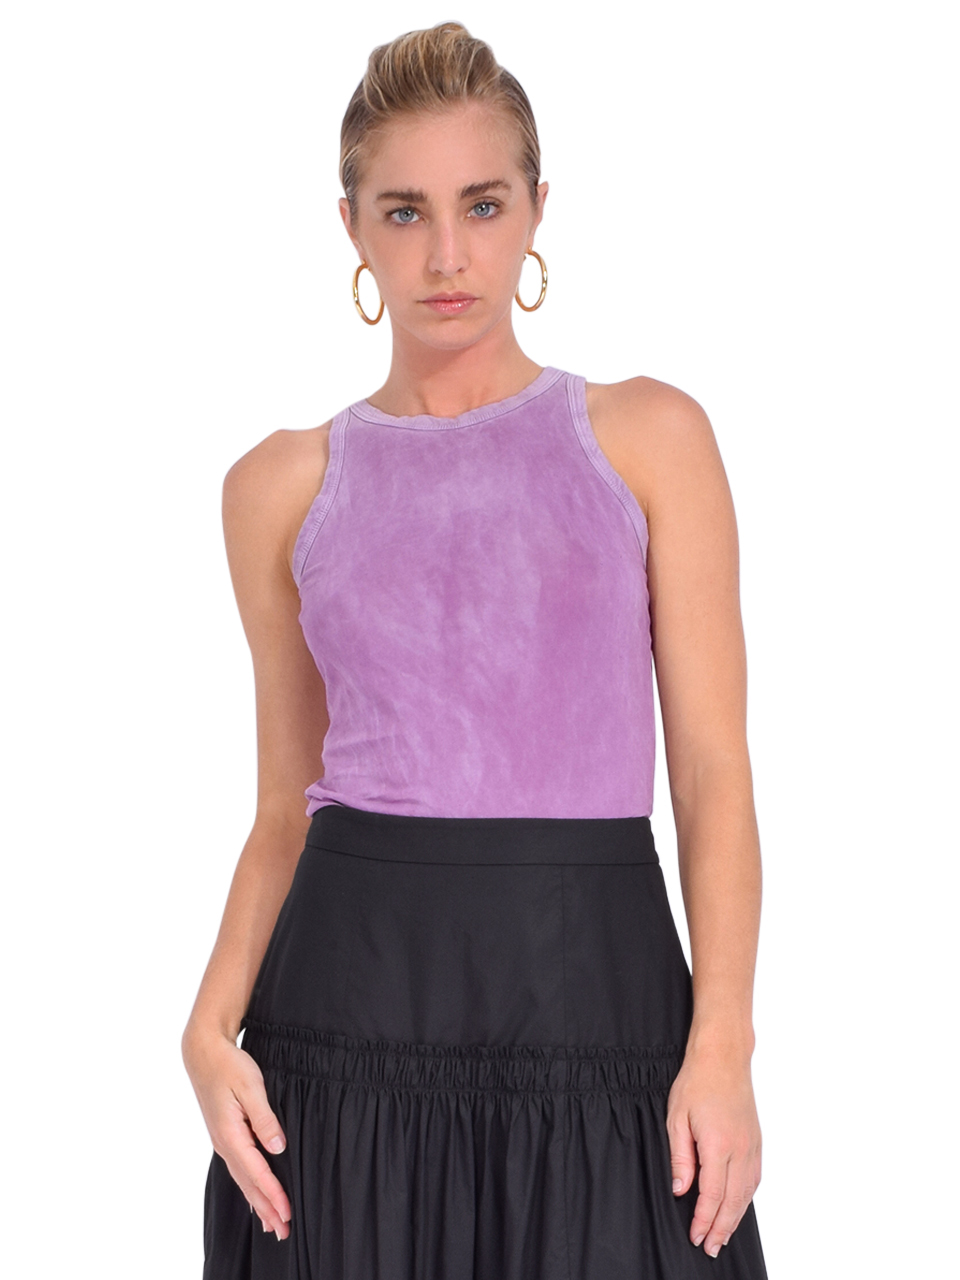 COTTON CITIZEN Standard Tank in Vintage Orchid Front View 